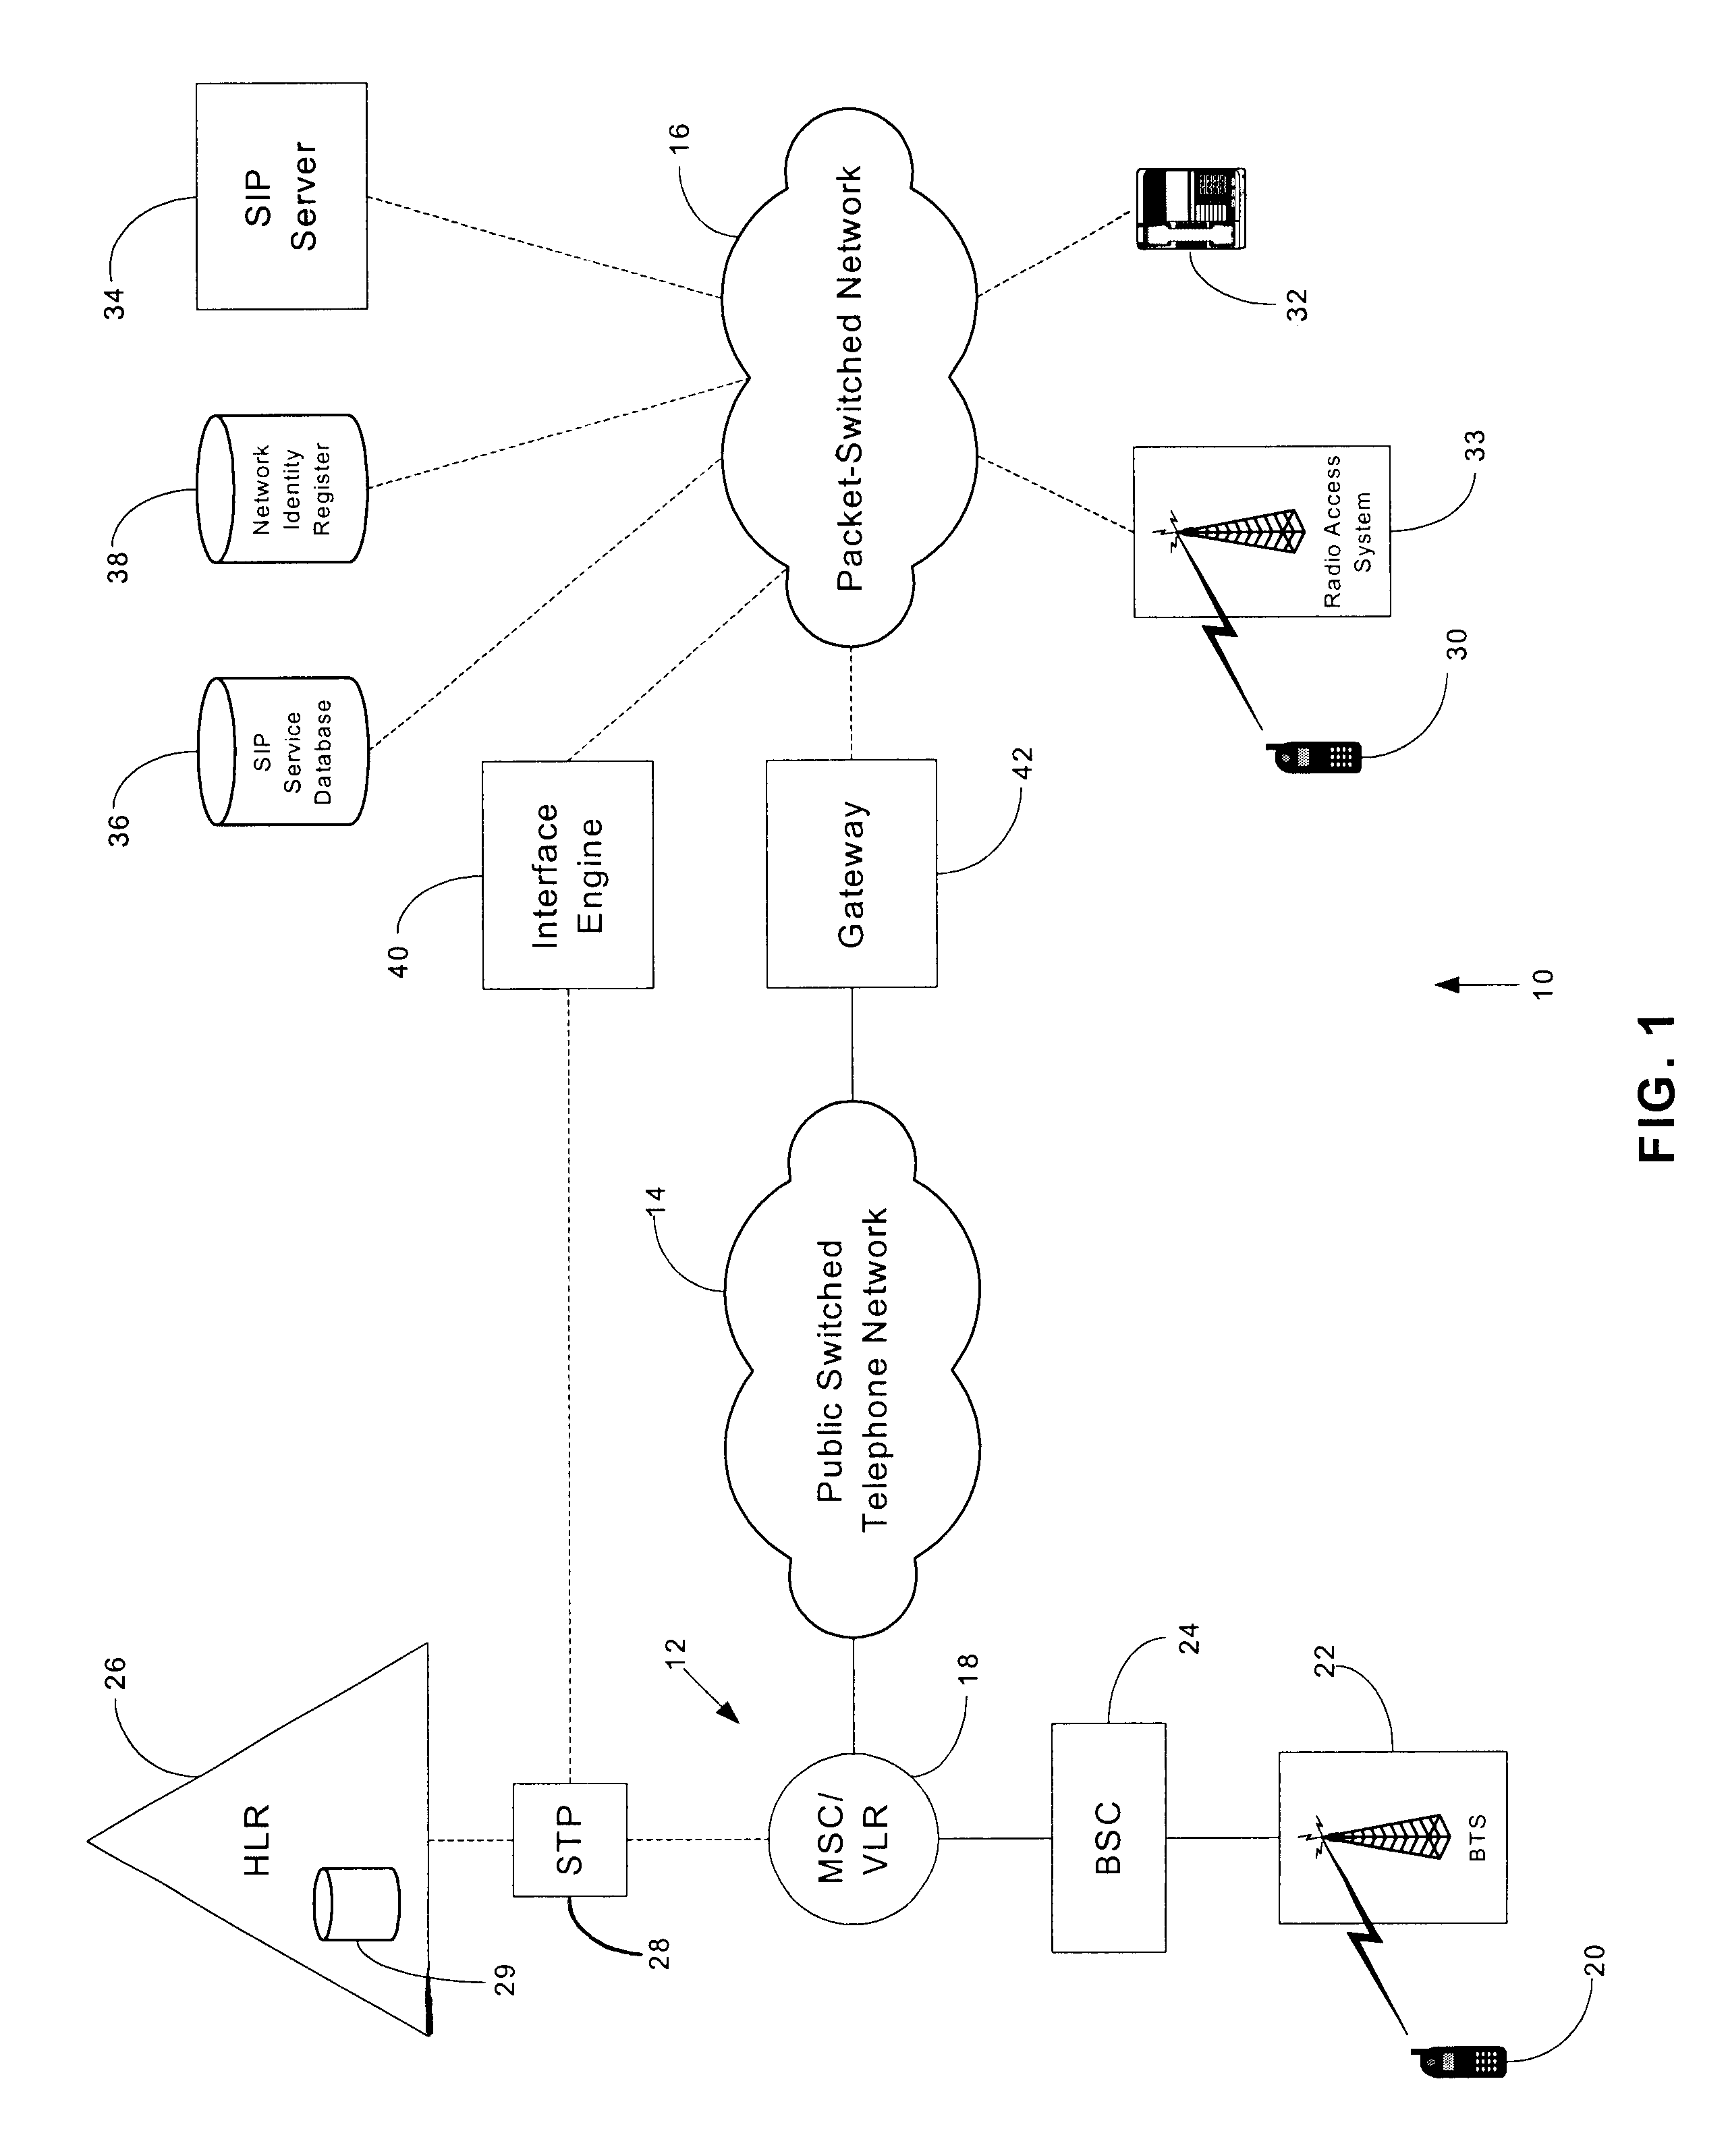 Method and system for interfacing a legacy circuit-switched network with a packet-switched network